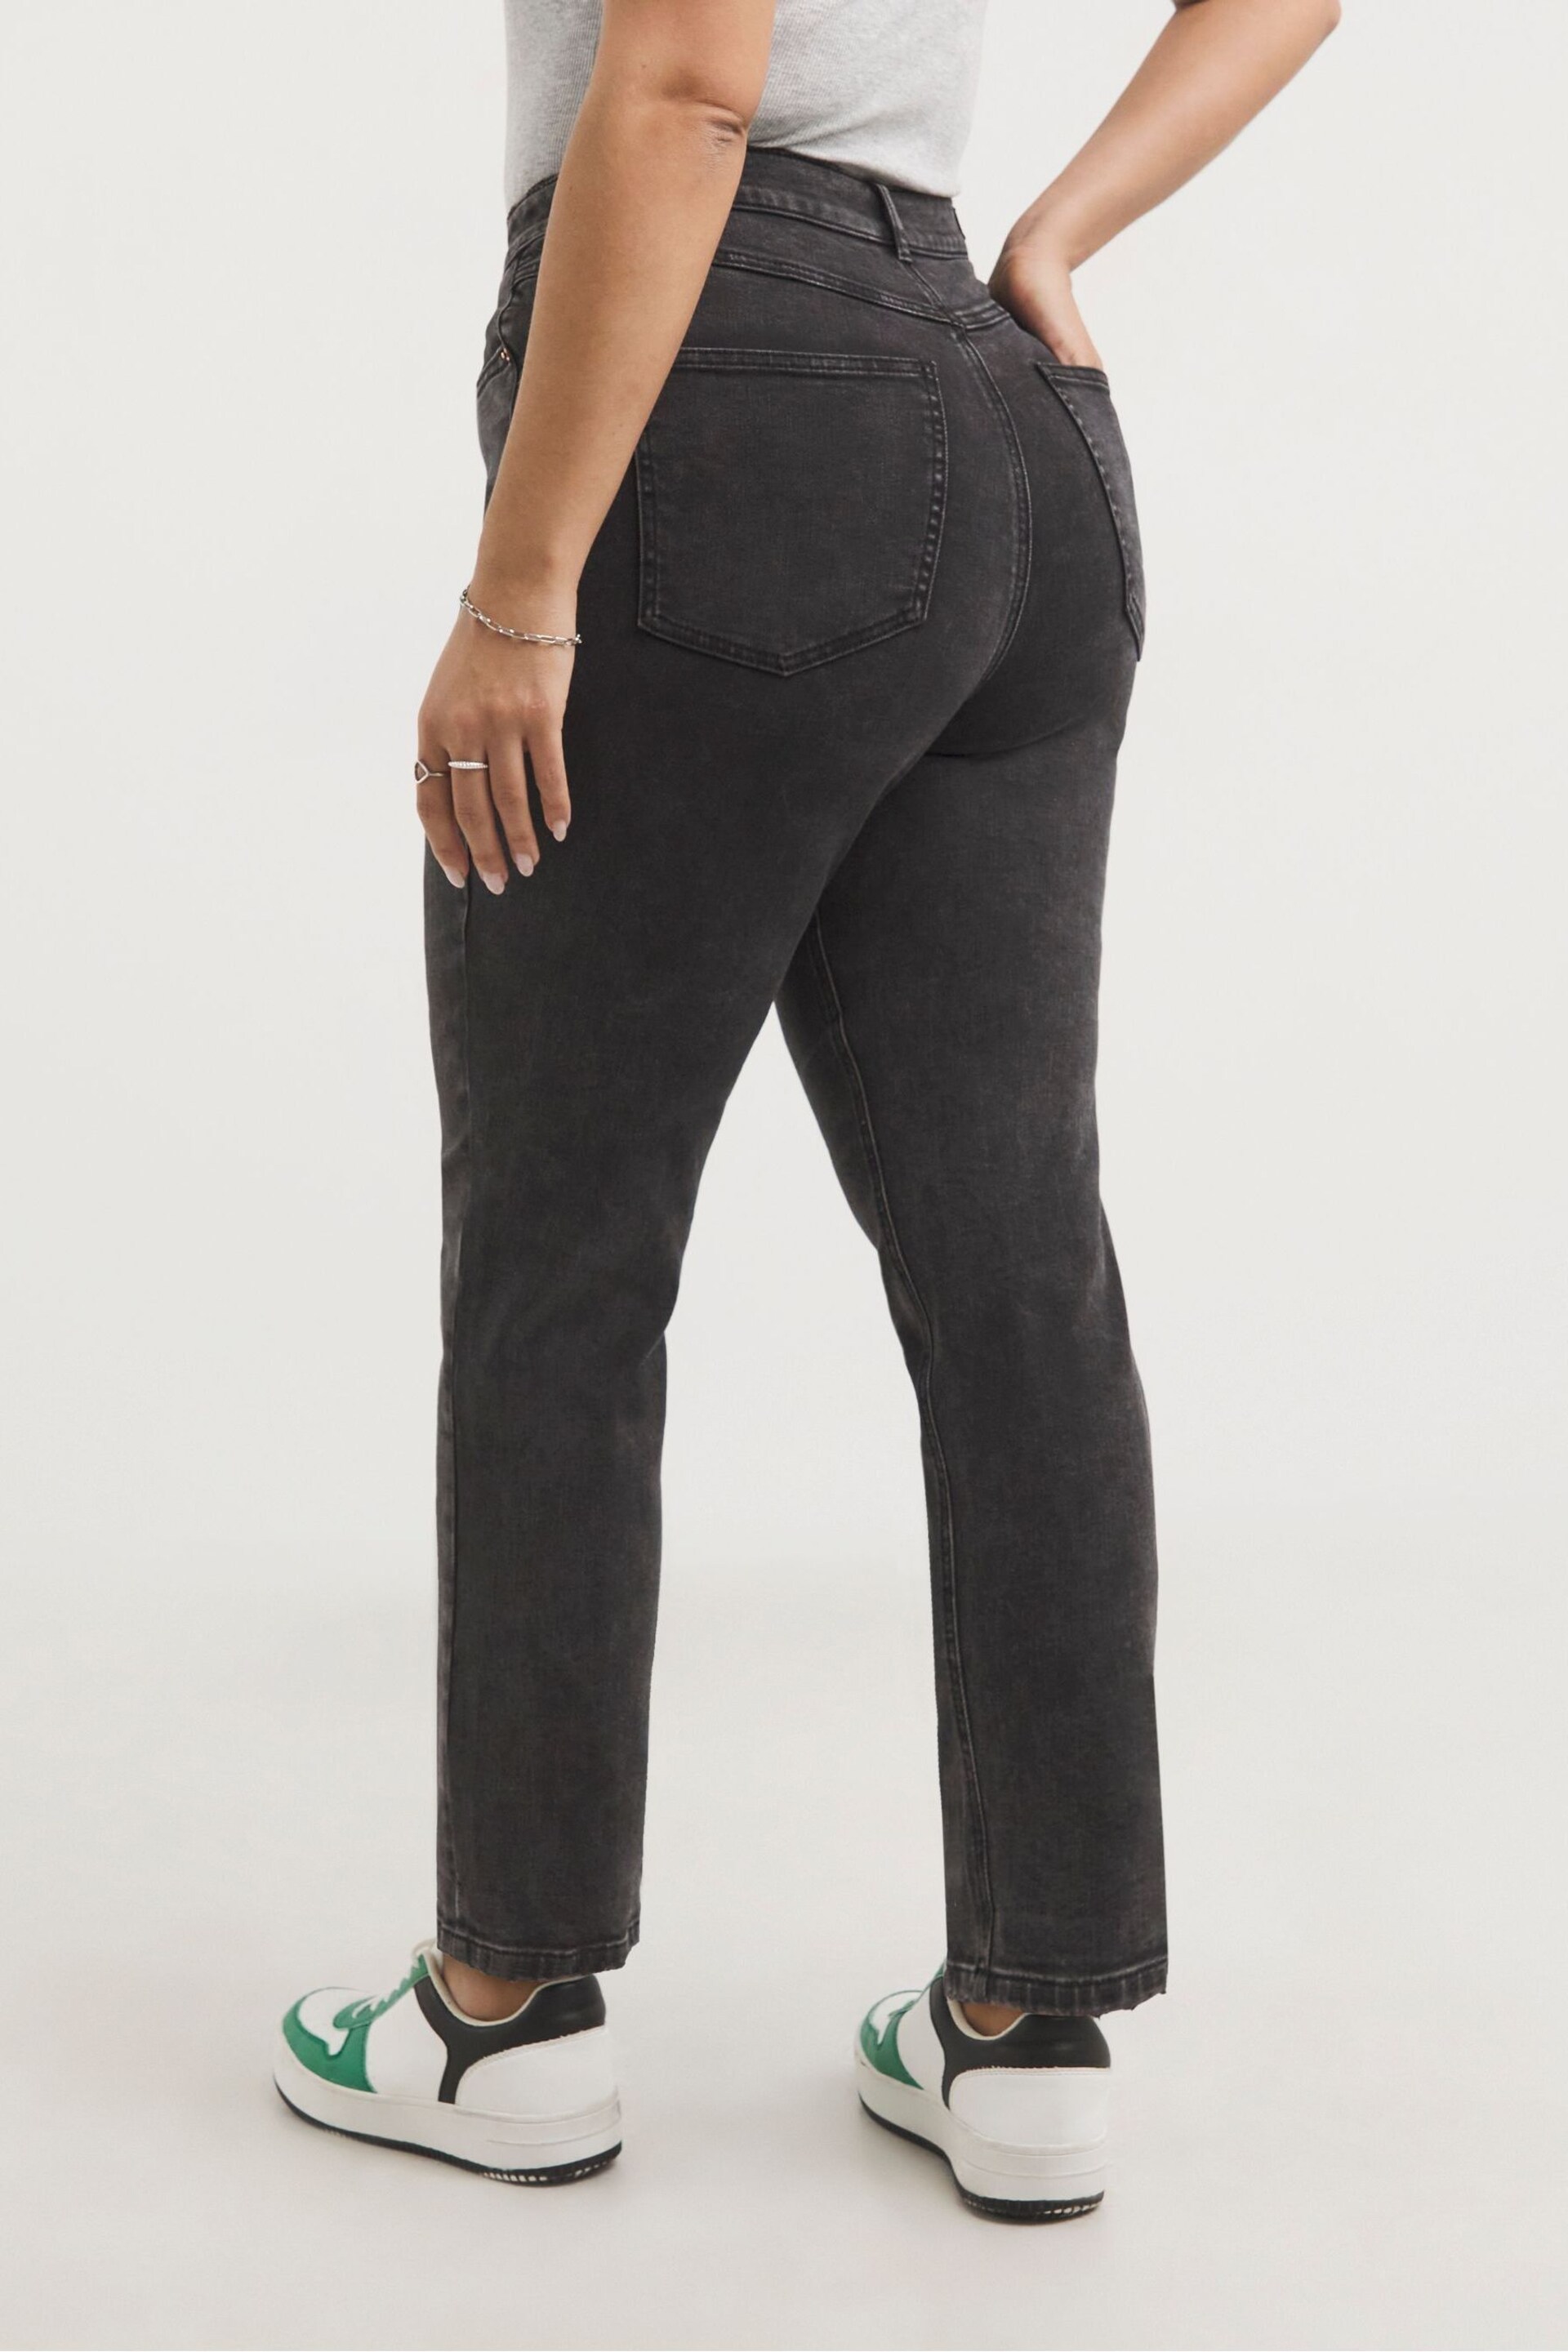 Simply Be Black Wash Womens Demi Mom Jeans - Image 2 of 4